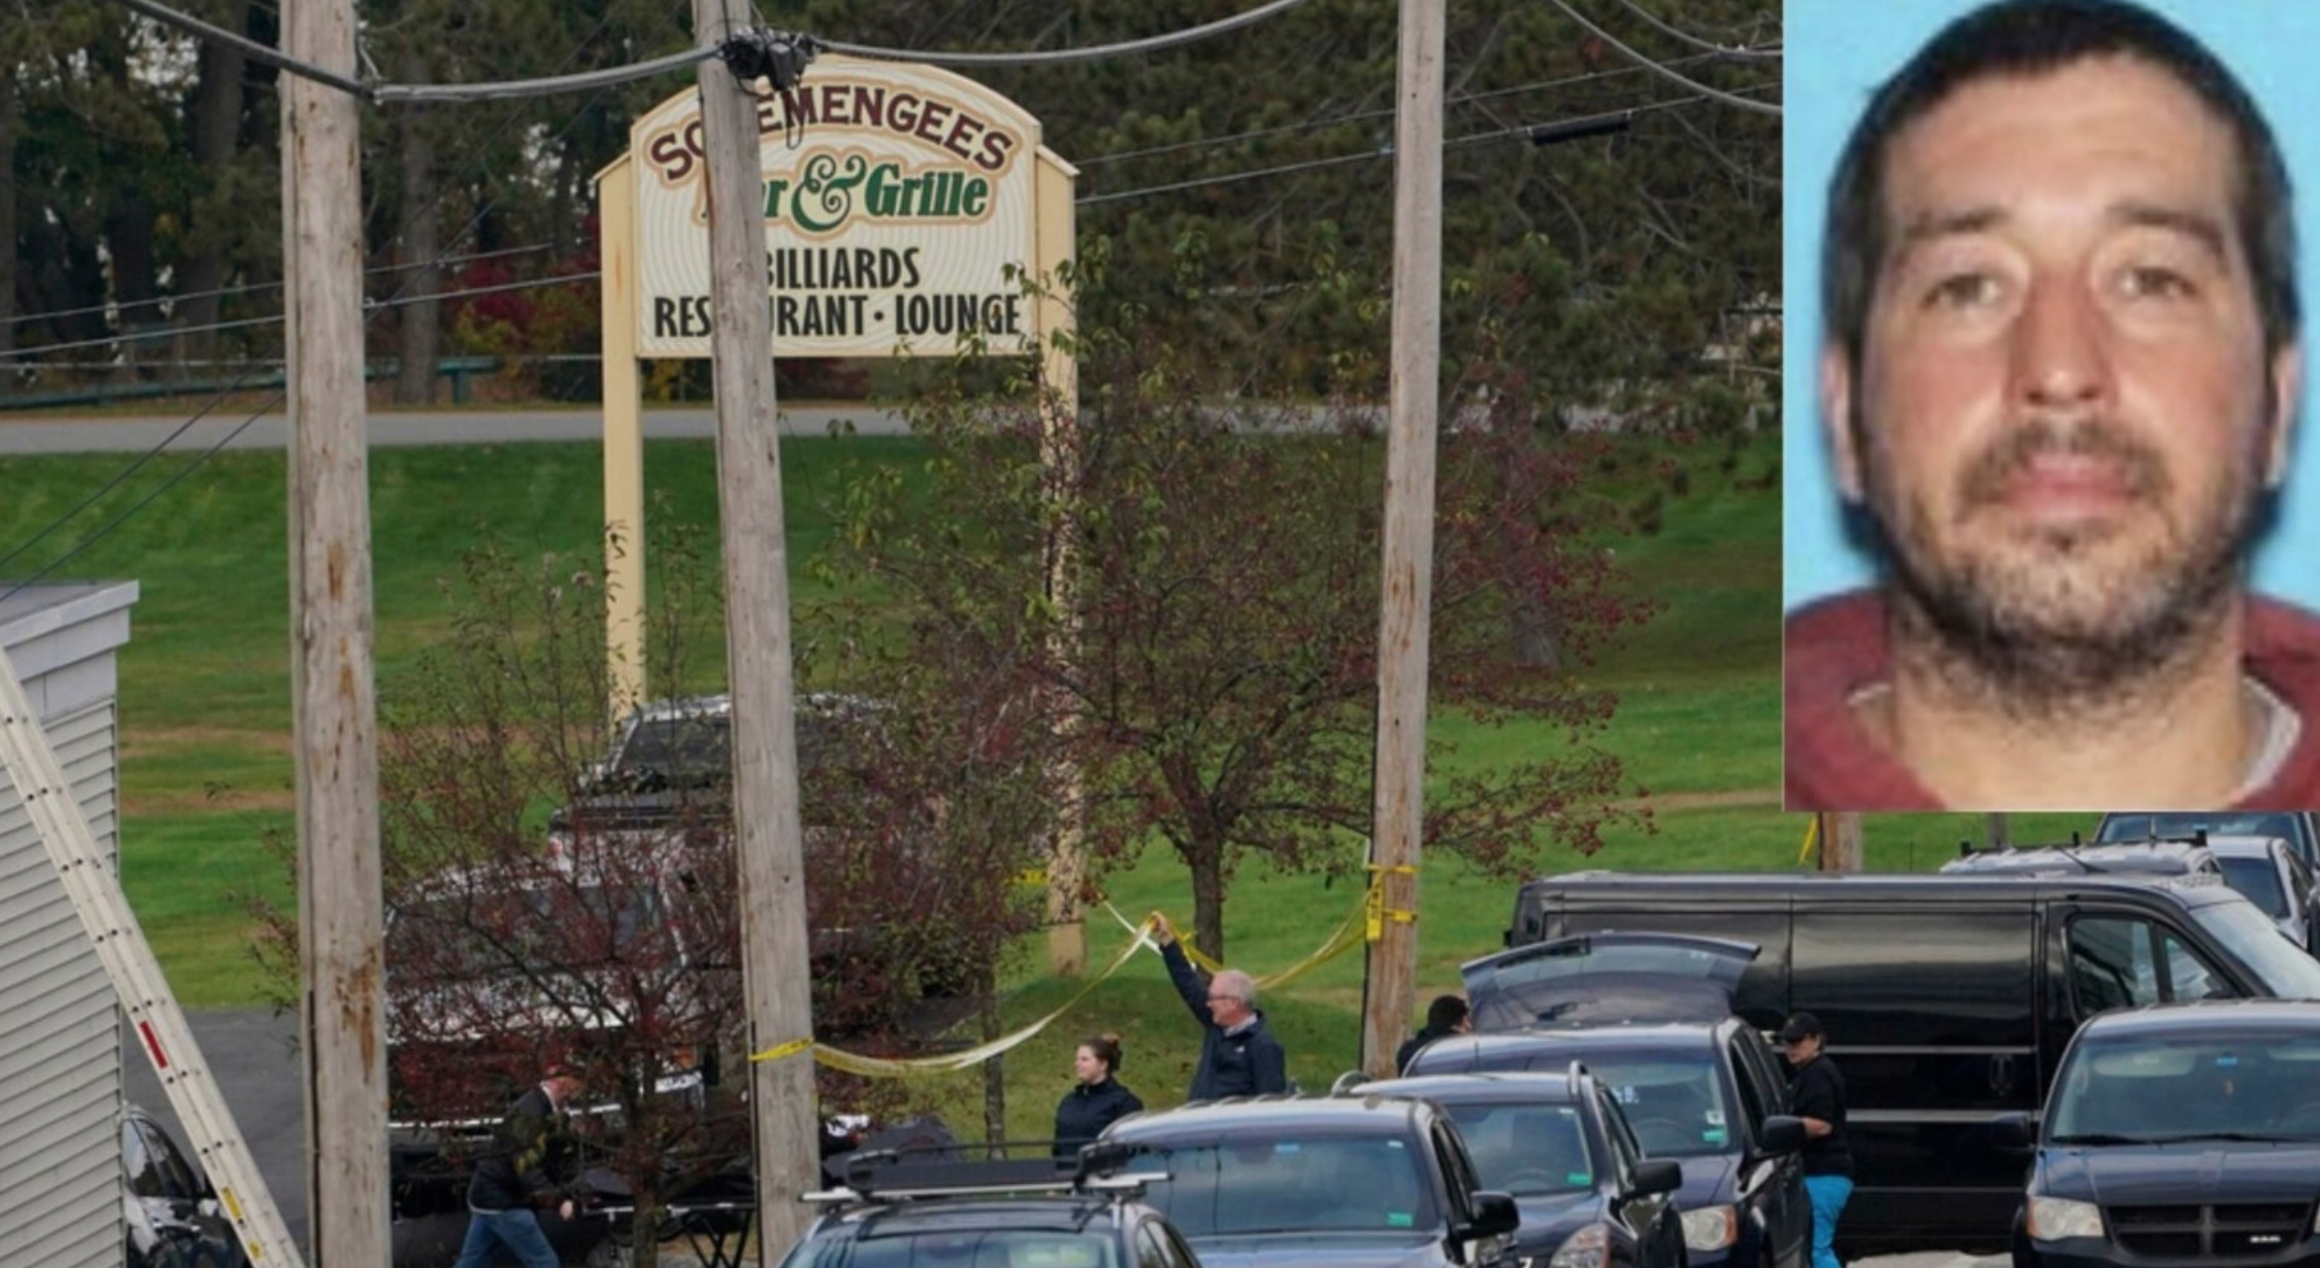 USA: At least 16 dead in Maine shooting; police search for assailant